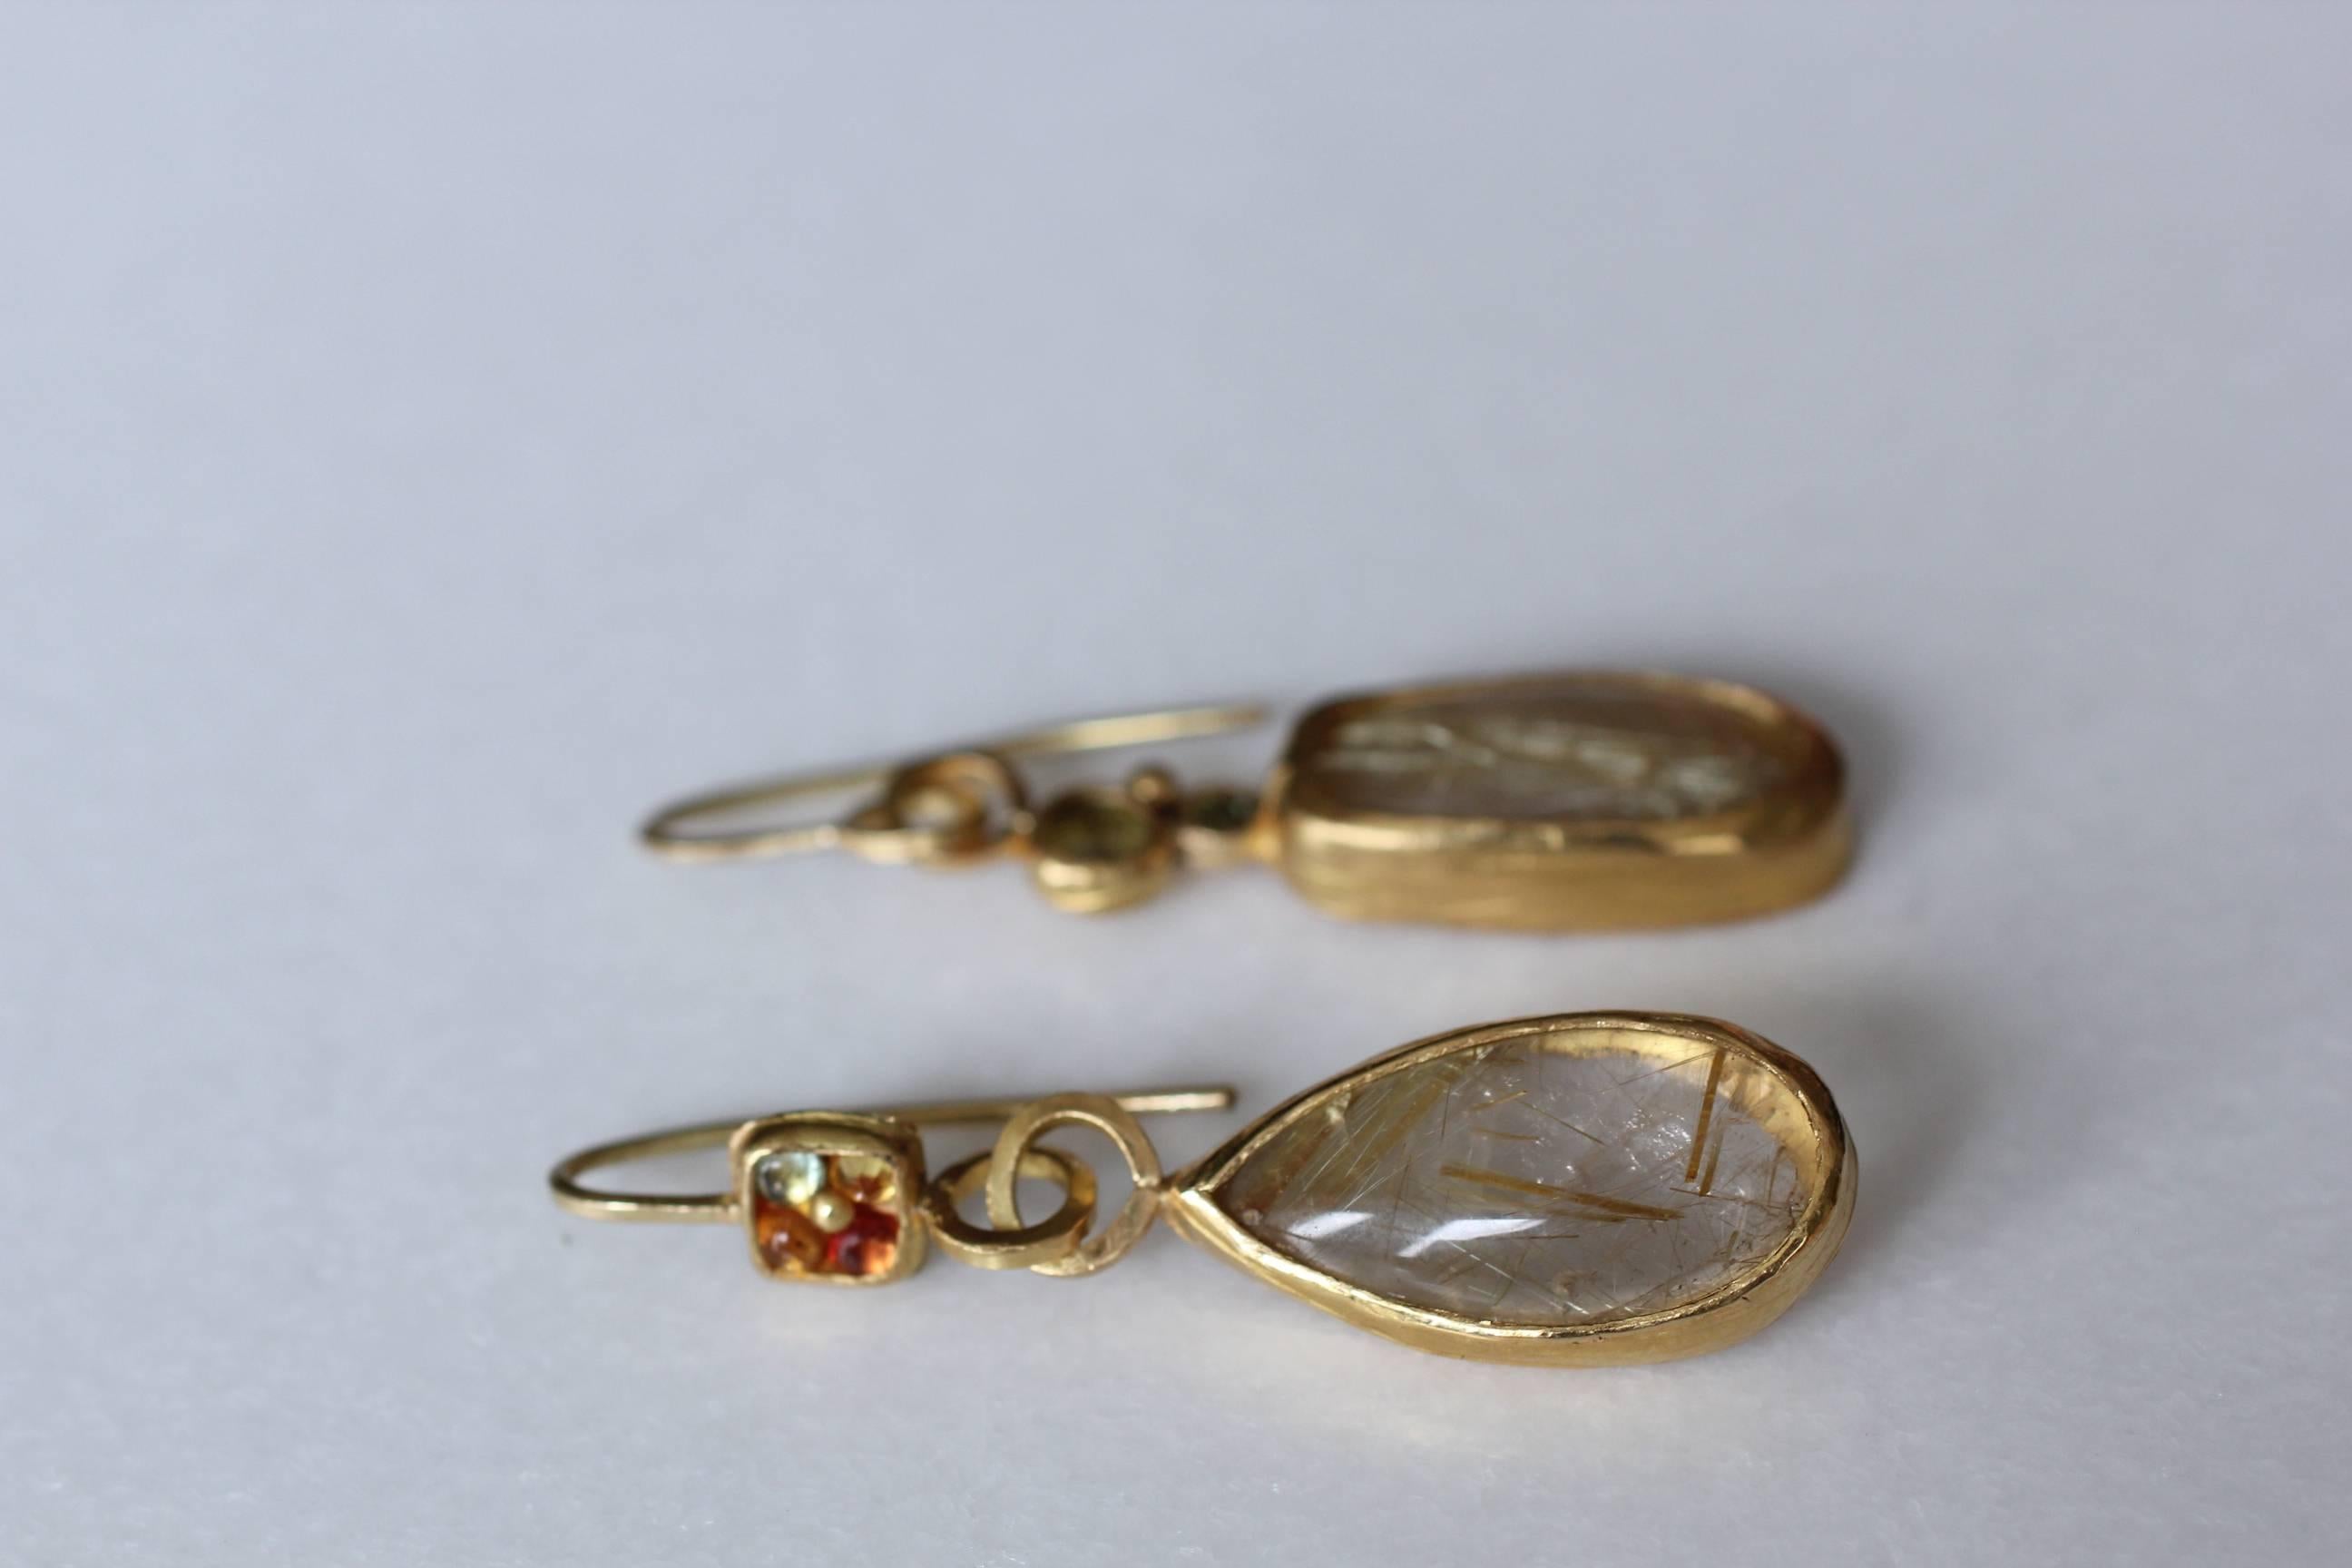 Circus Earrings. Fun, asymmetrical handcrafted 21k solid gold dangle drop earrings featuring gold rutilated quartz highlighted with sapphires and tourmalines. Perfect for every day. Their neutral subtle color allows easy coordination with just about